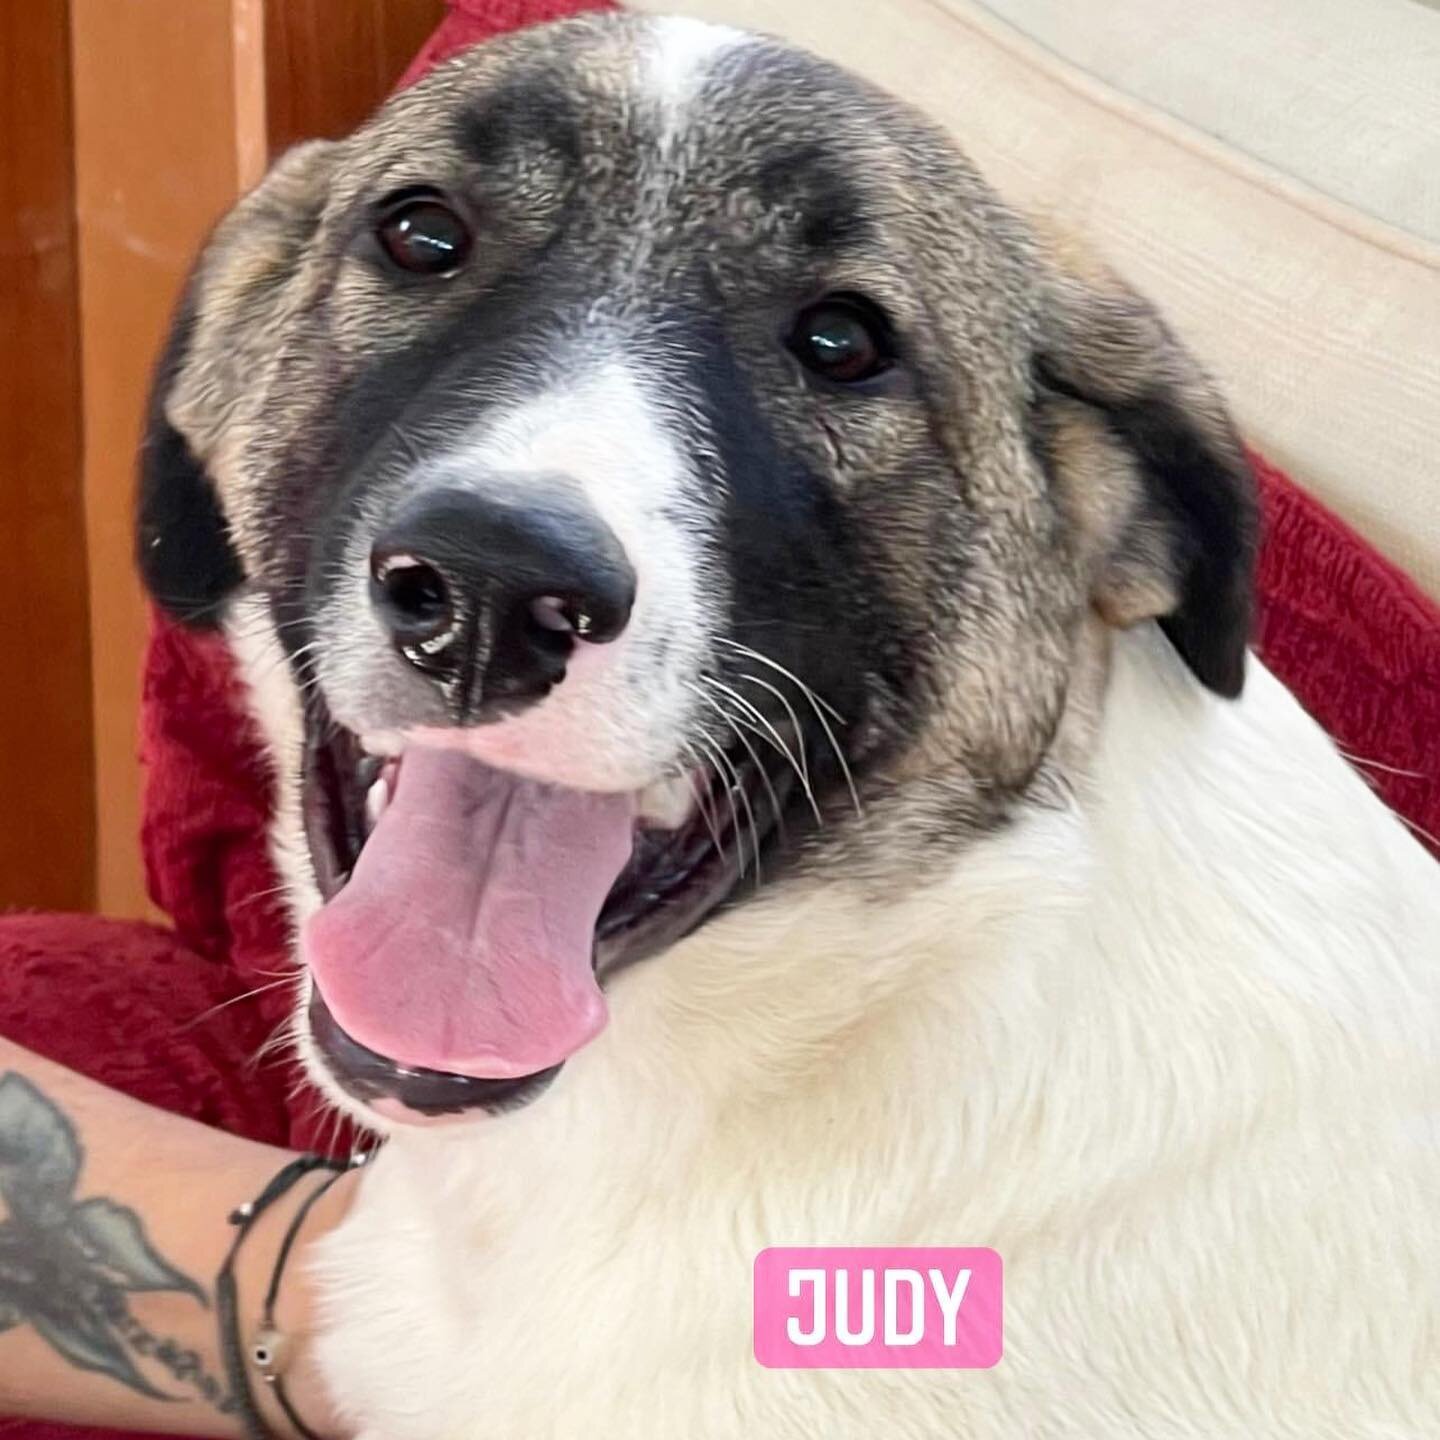 MEET SMILING JUDY! &hearts;️ 
1 of the 30 puppies rescued in June! A confident 6 month old girl that would make a family really happy! She loves humans, is sociable with both humans and dogs, she is very clever and learns quickly. She a puppy needing